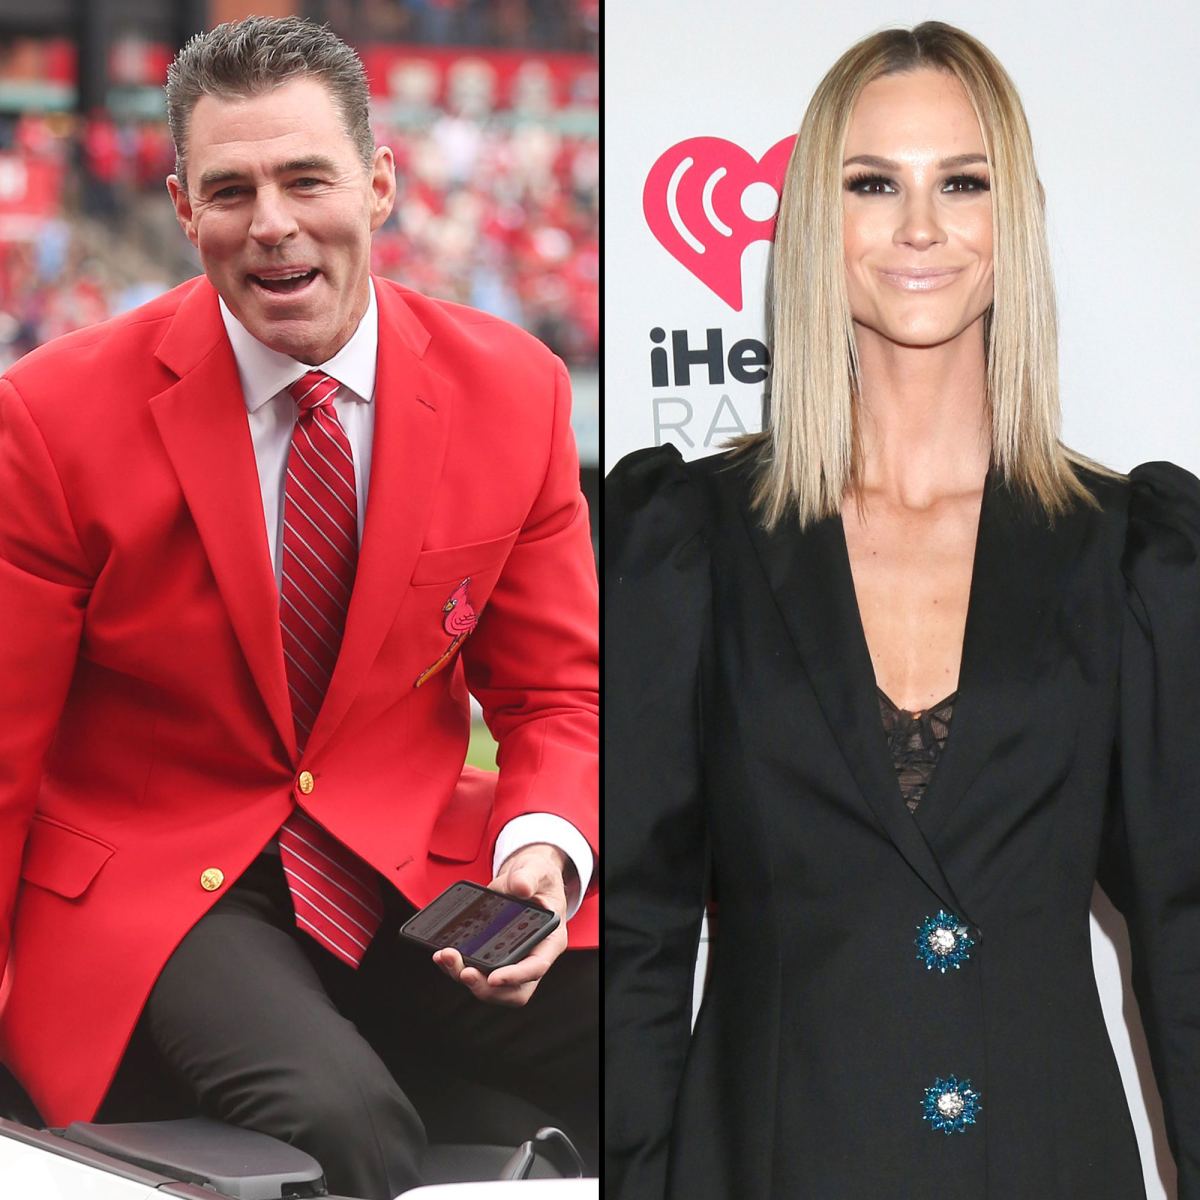 Engagement With Jim Edmonds, Family, Net Worth and Profession - Breaking  News in USA Today